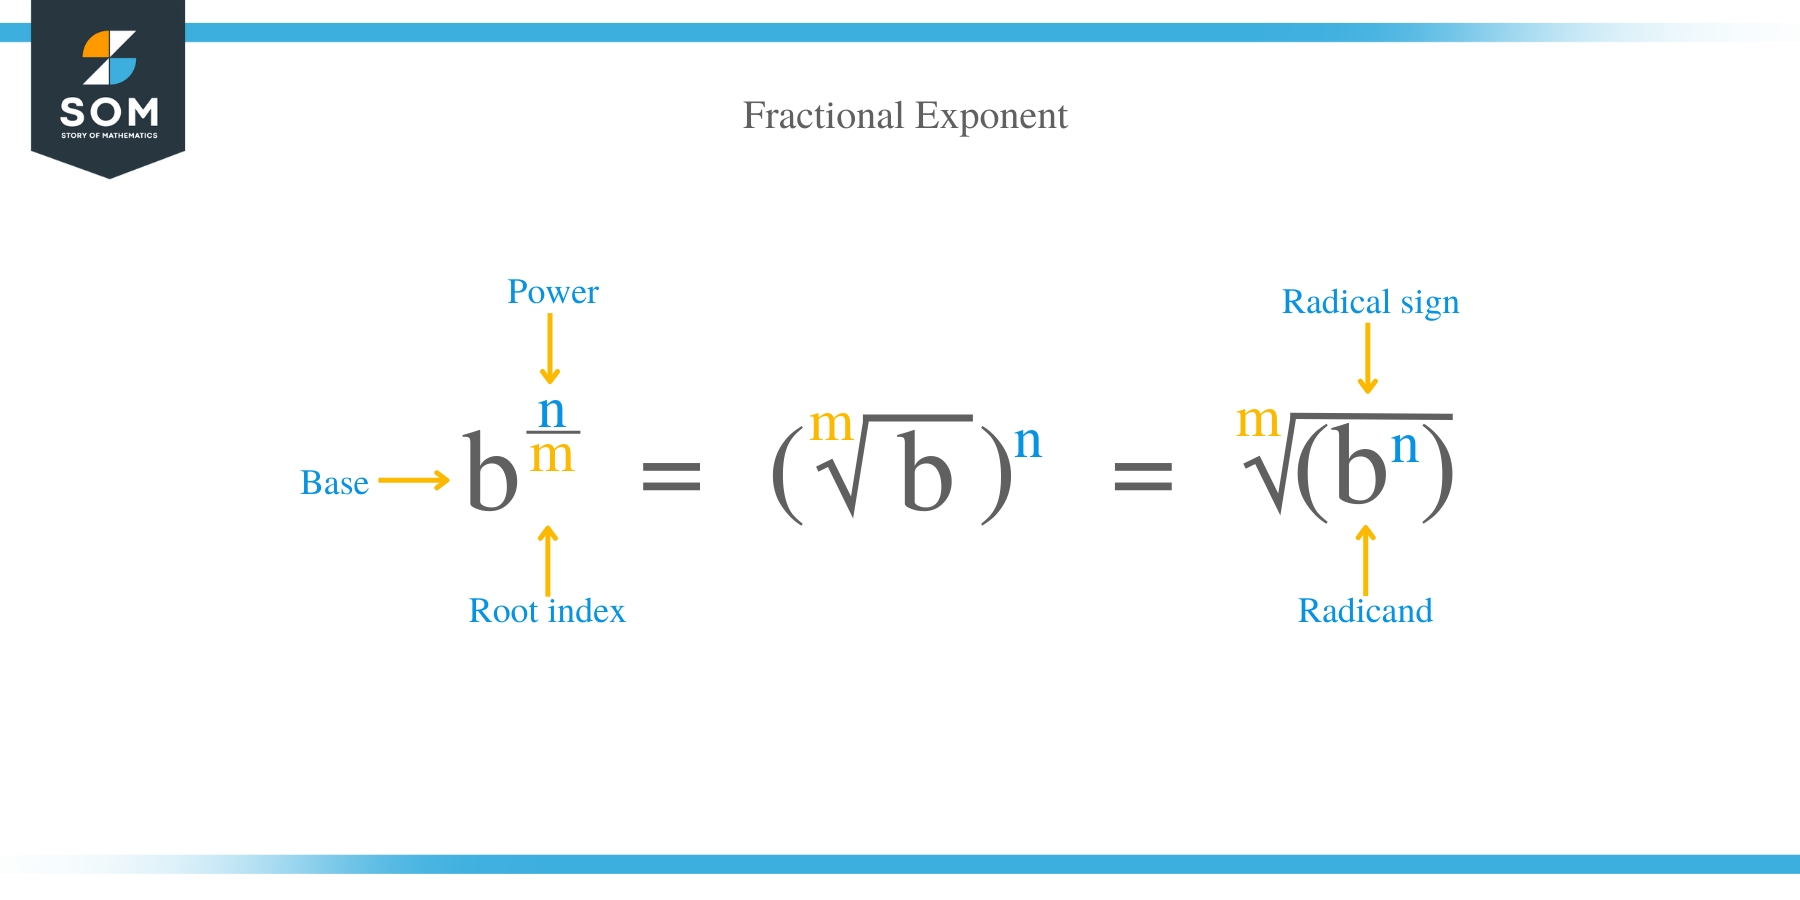 What is a Fractional Exponent?